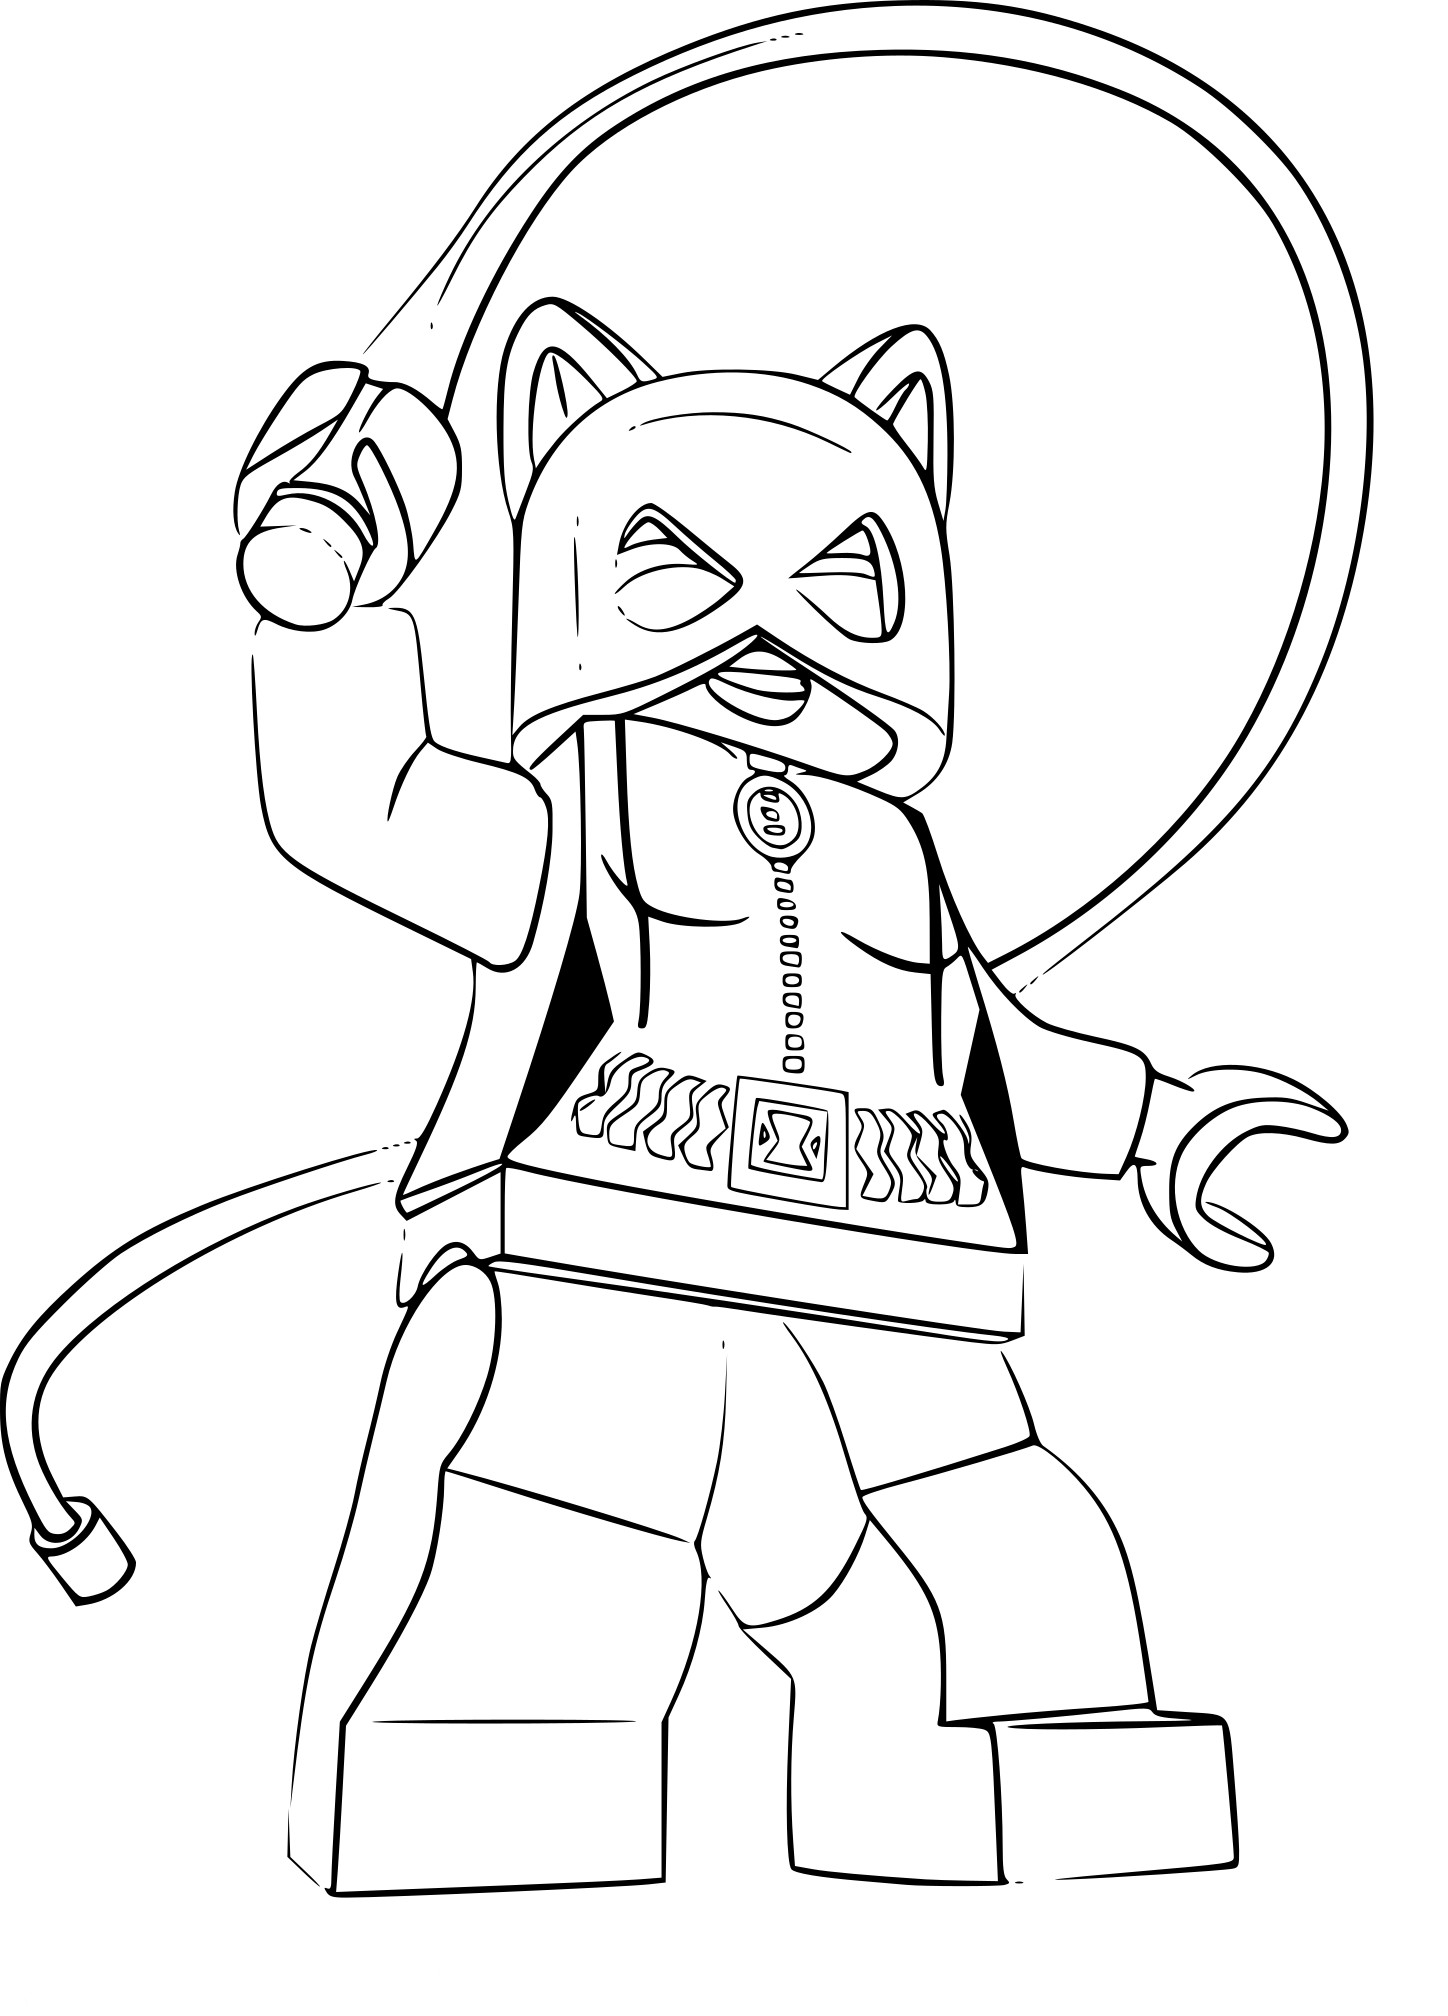 Lego Catwoman coloring page